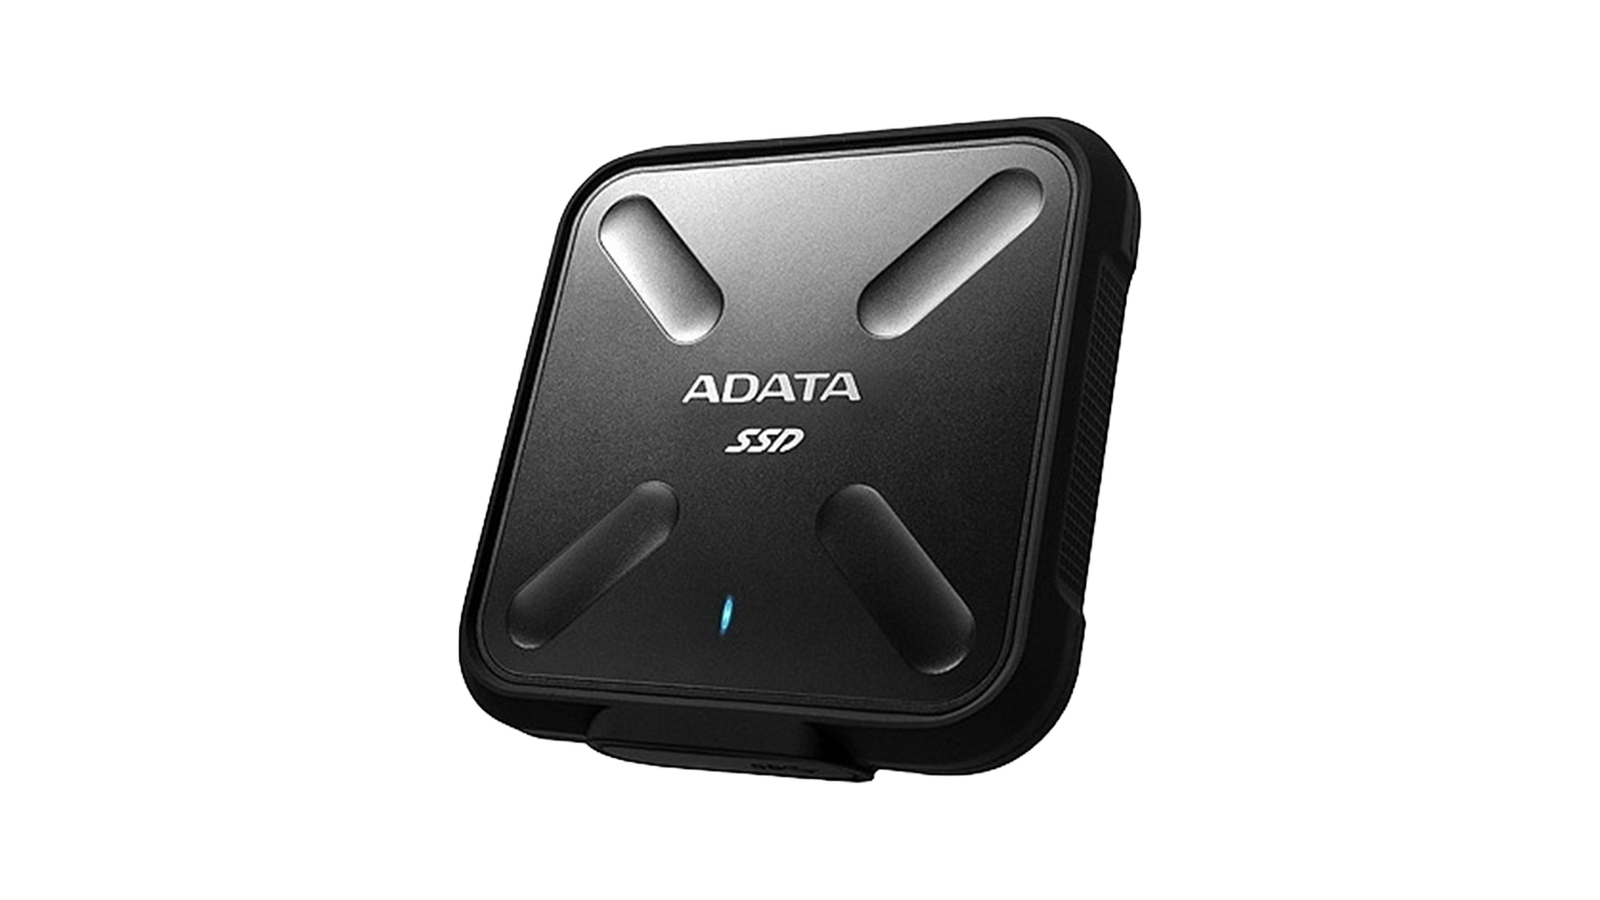 Adata SD700 External SSD - Most rugged, water-resistant SSD